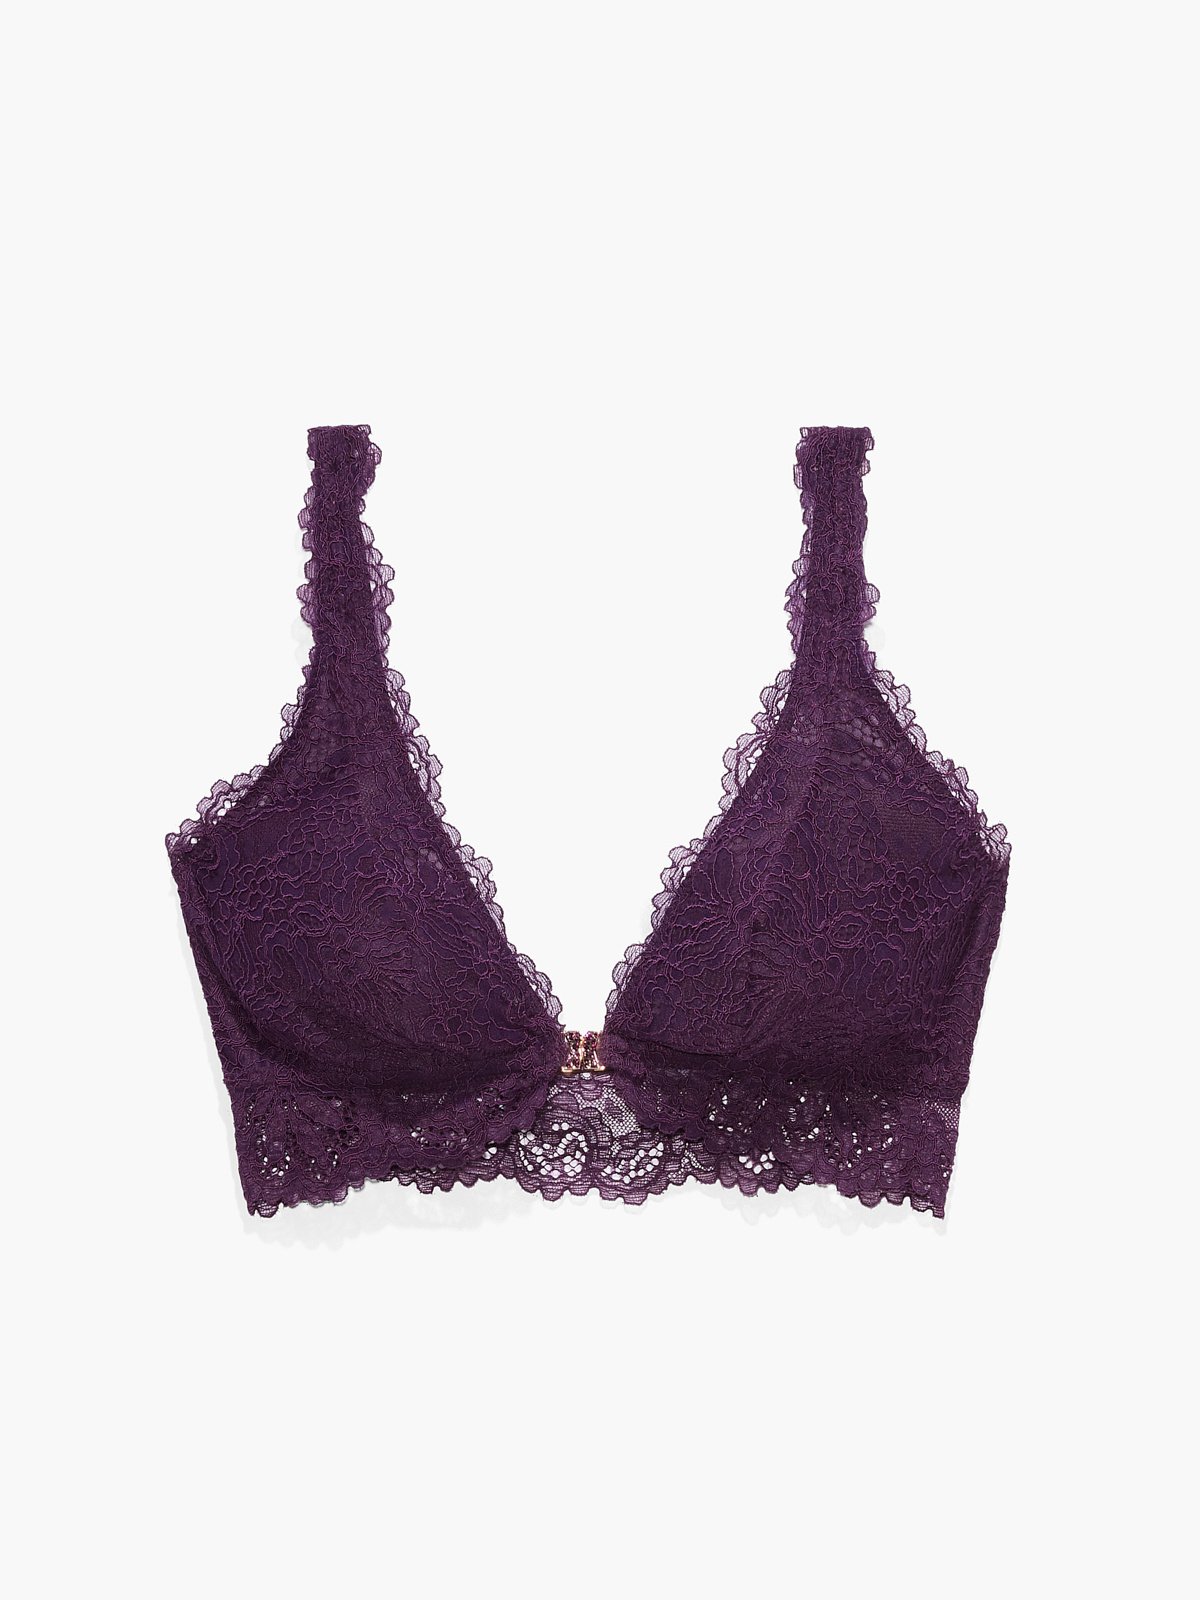 https://cdn.savagex.com/media/images/products/BB2148518-5228/ROMANTIC-CORDED-LACE-FRONT-CLOSURE-BRALETTE-BB2148518-5228-LAYDOWN-1200x1600.jpg